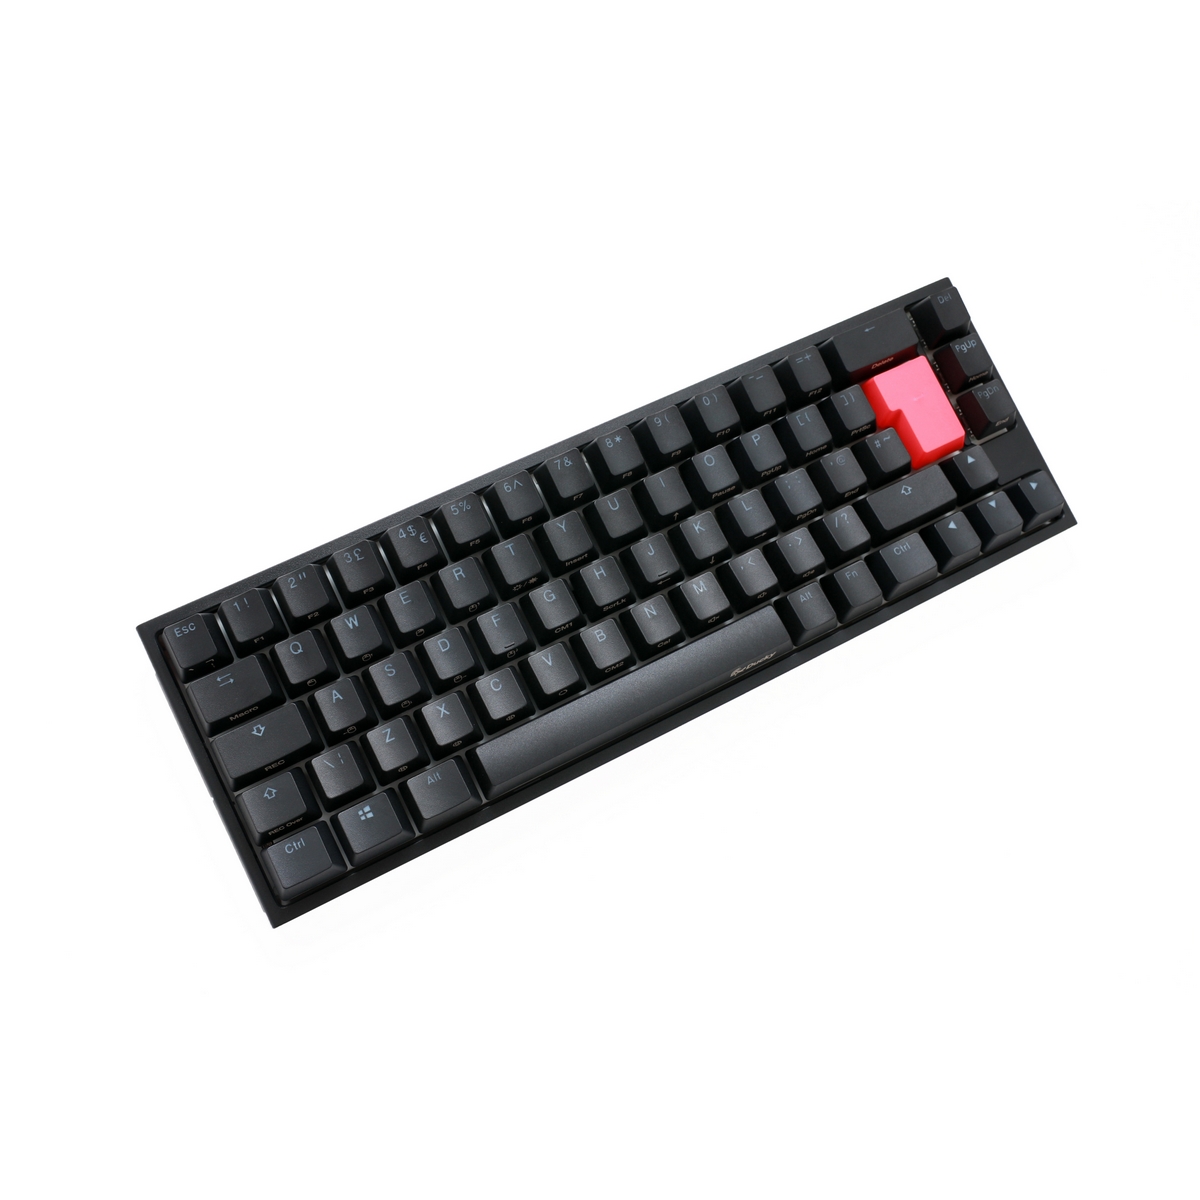 Ducky - Ducky One 2 SF 65% RGB Backlit Silent Red Cherry MX Switch USB Mechanical Gaming Keyboard UK Layout